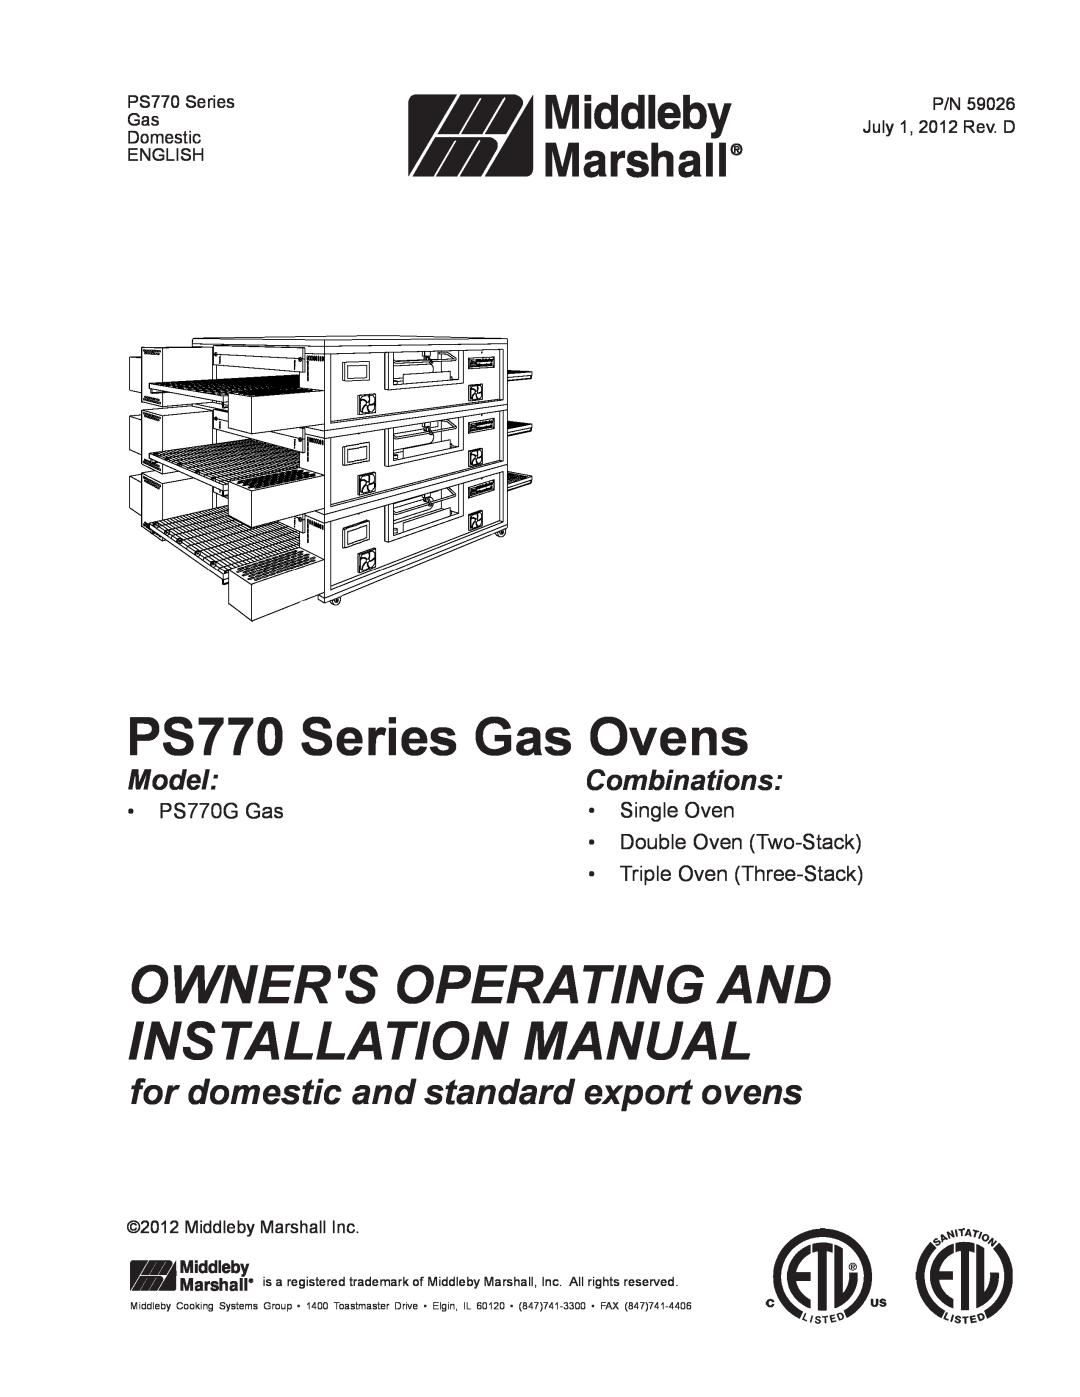 Middleby Cooking Systems Group installation manual PS770 Series Gas Ovens, Owners Operating And Installation Manual 